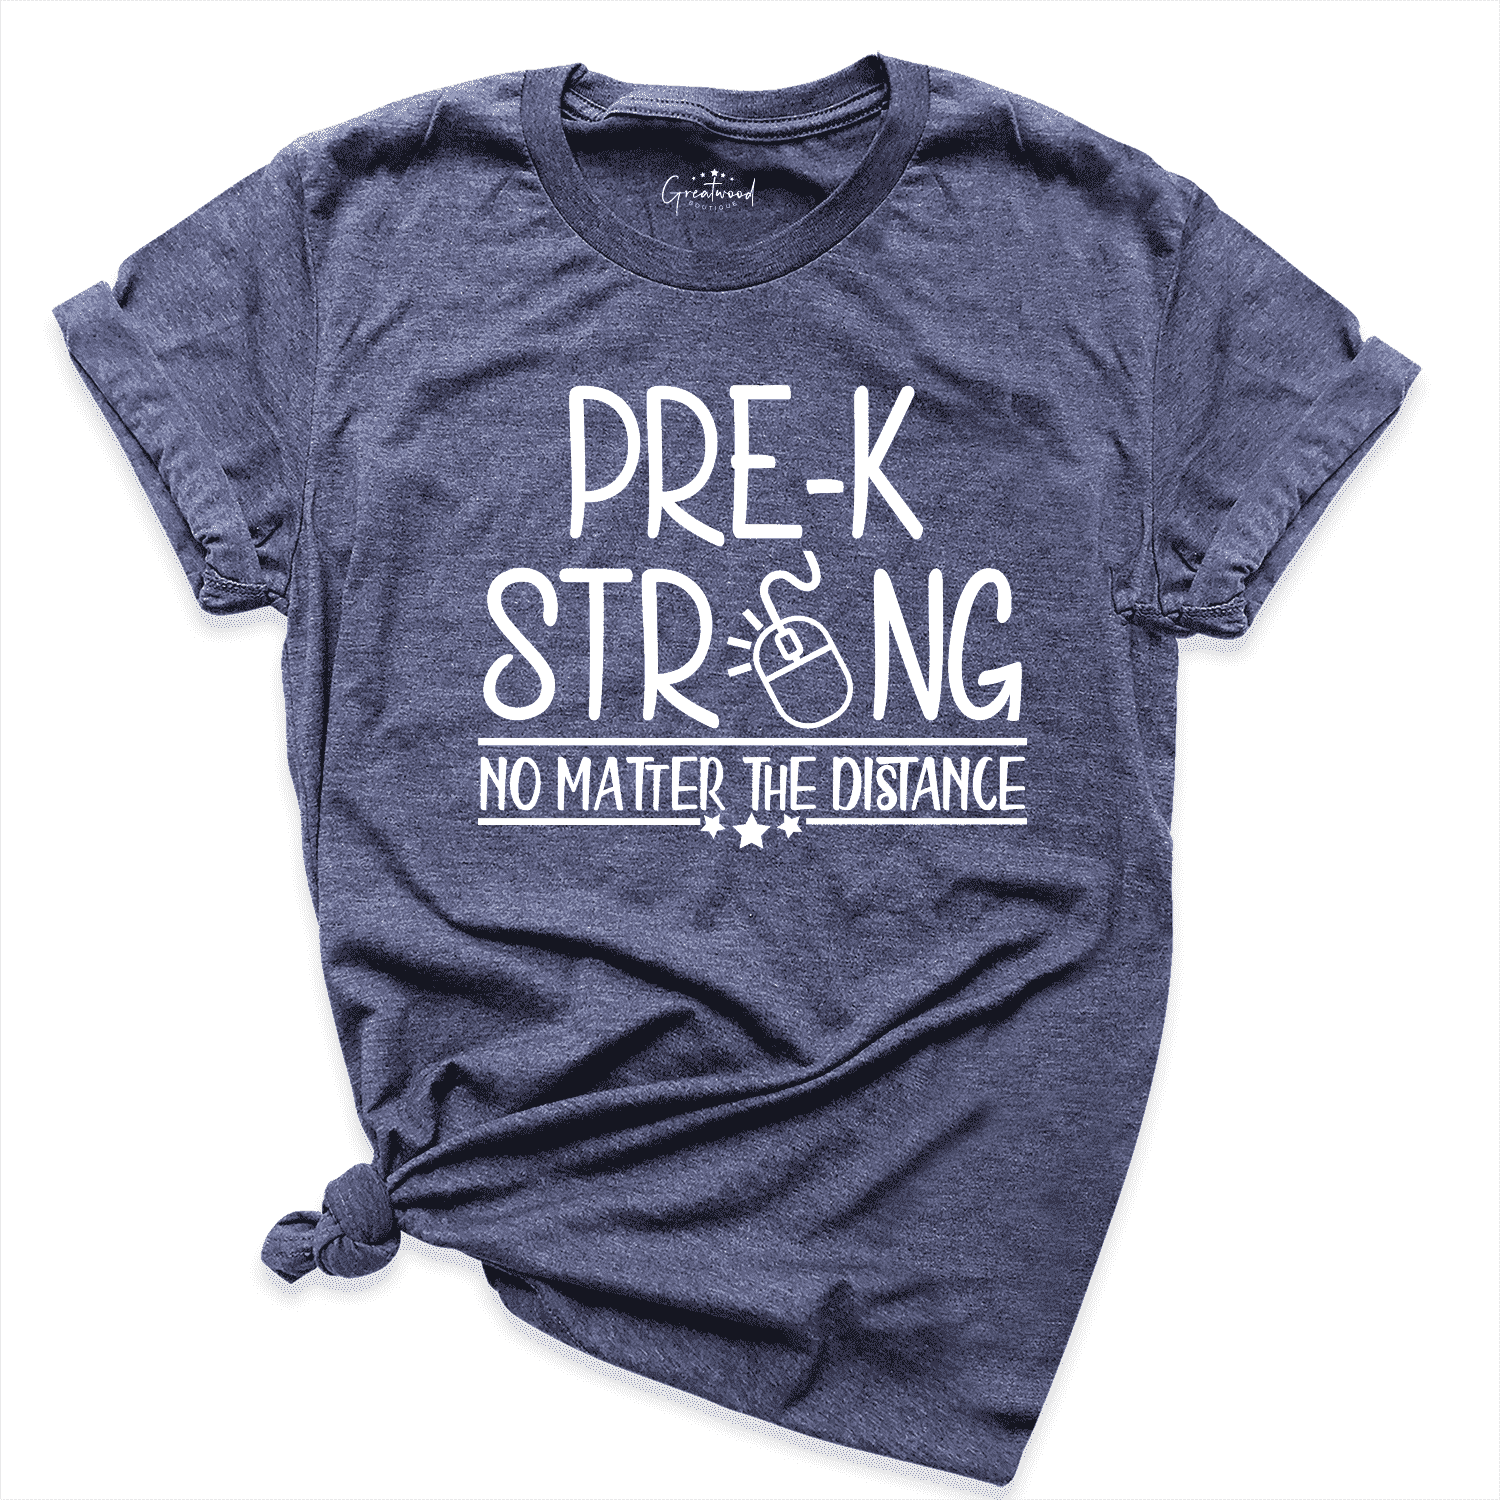 Pre-K Strong Shirt Navy - Greatwood Boutique